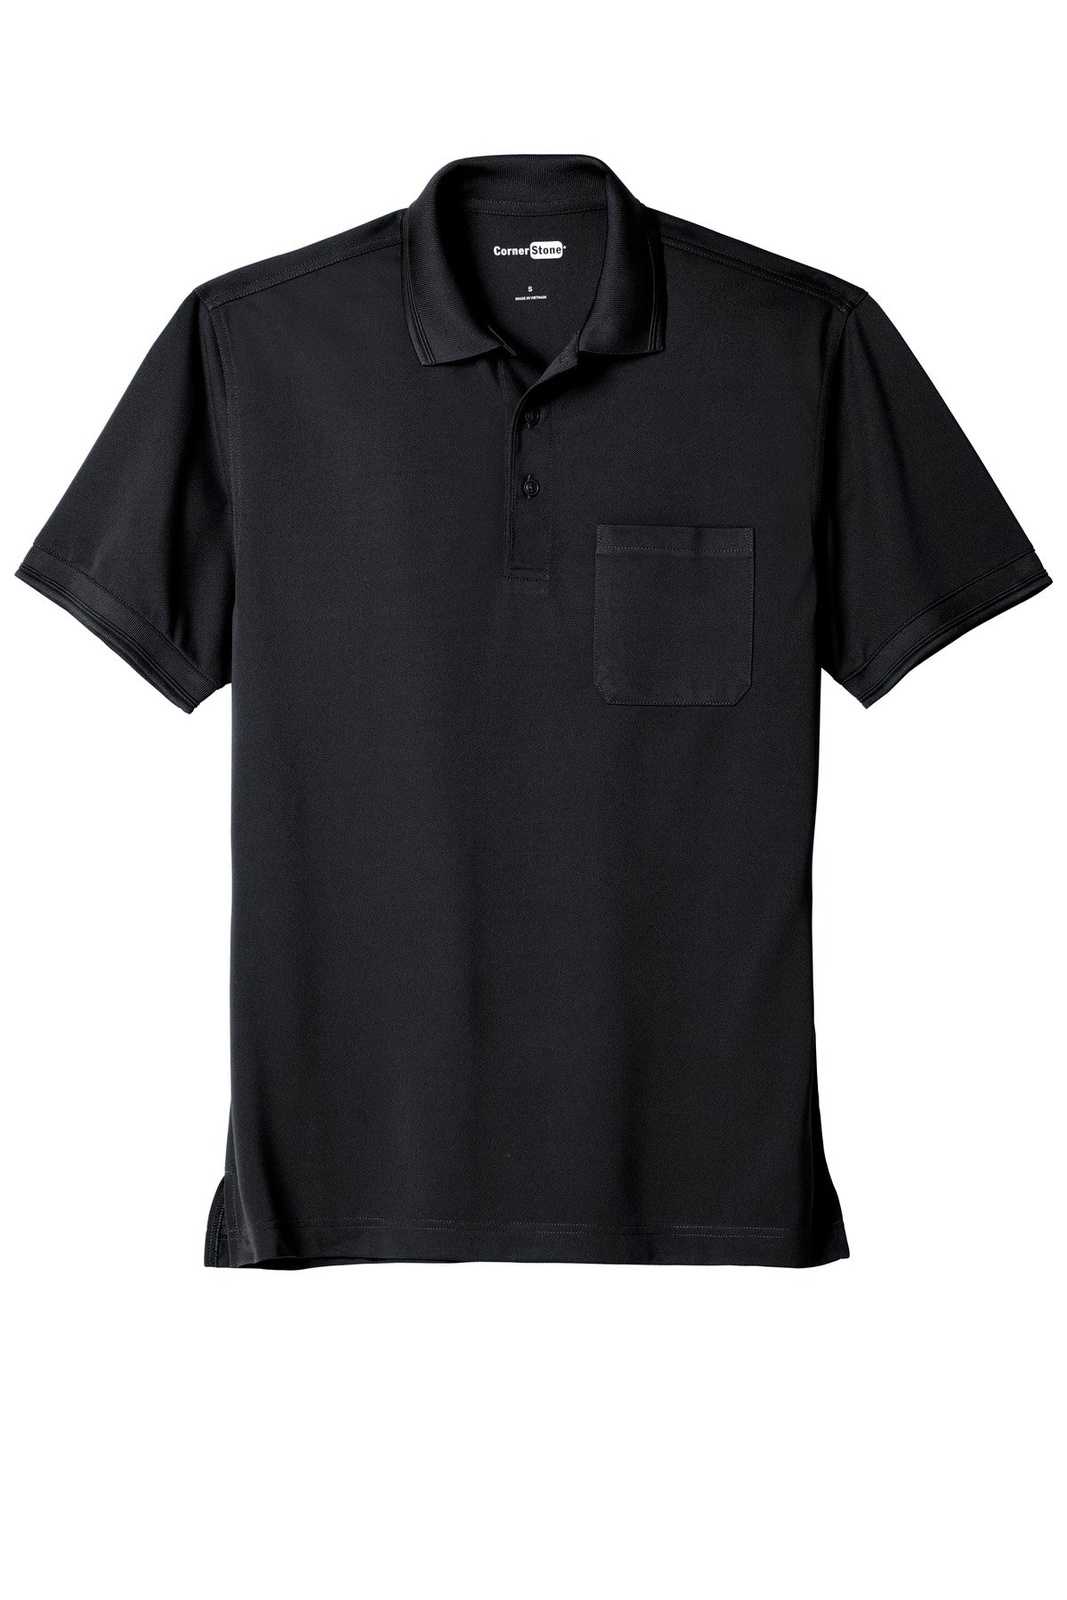 CornerStone CS4020P Industrial Snag-Proof Pique Pocket Polo - Navy Blue - HIT a Double - 5